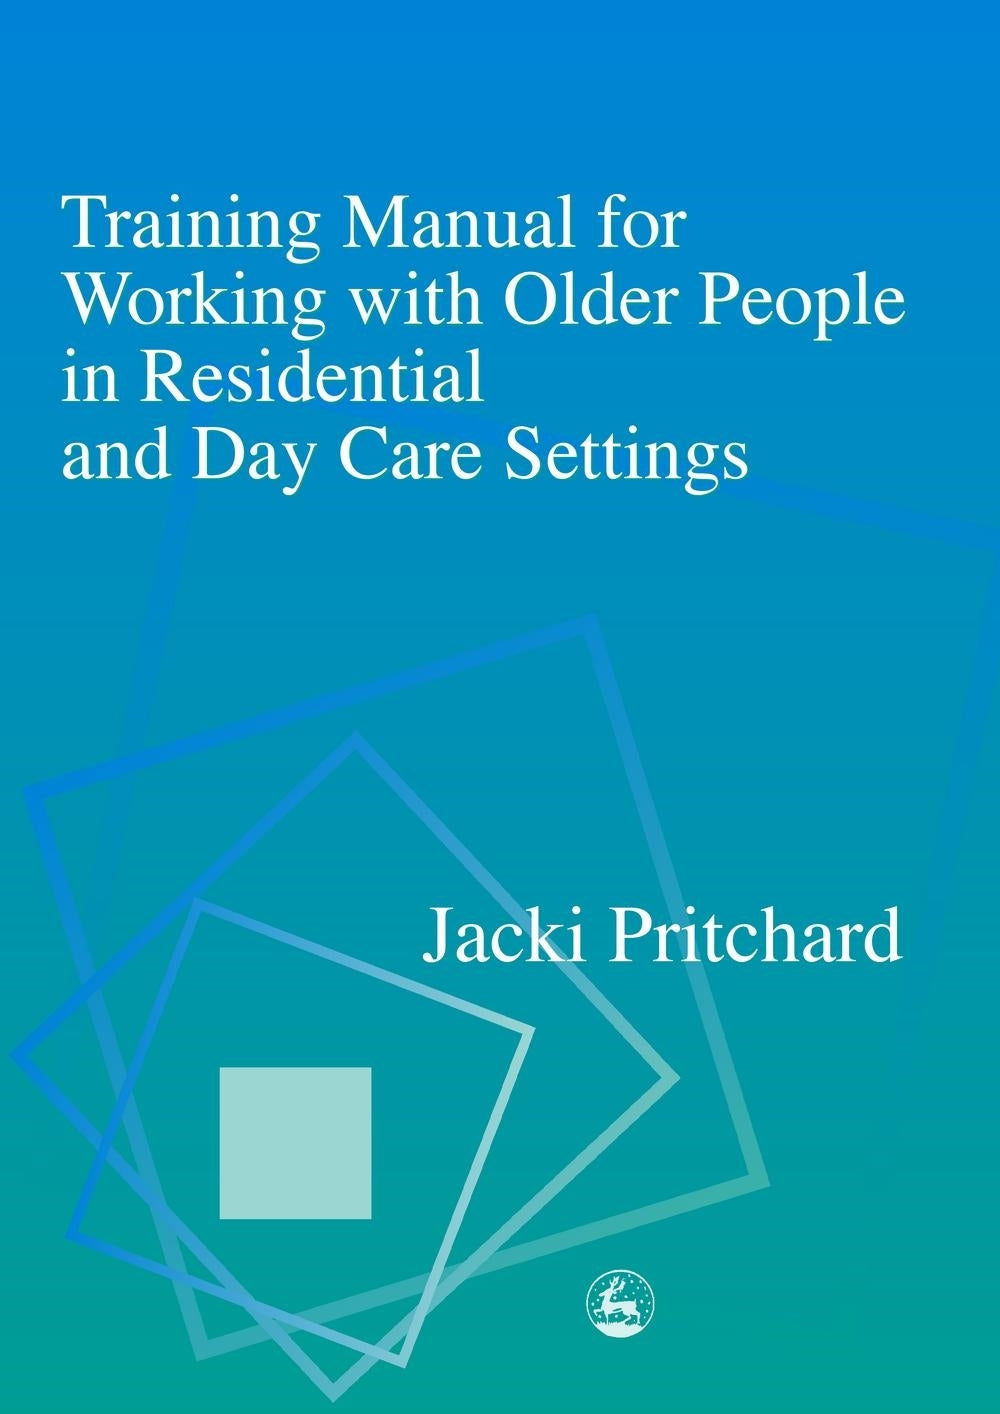 Training Manual for Working with Older People in Residential and Day Care Settings by Jacki Pritchard